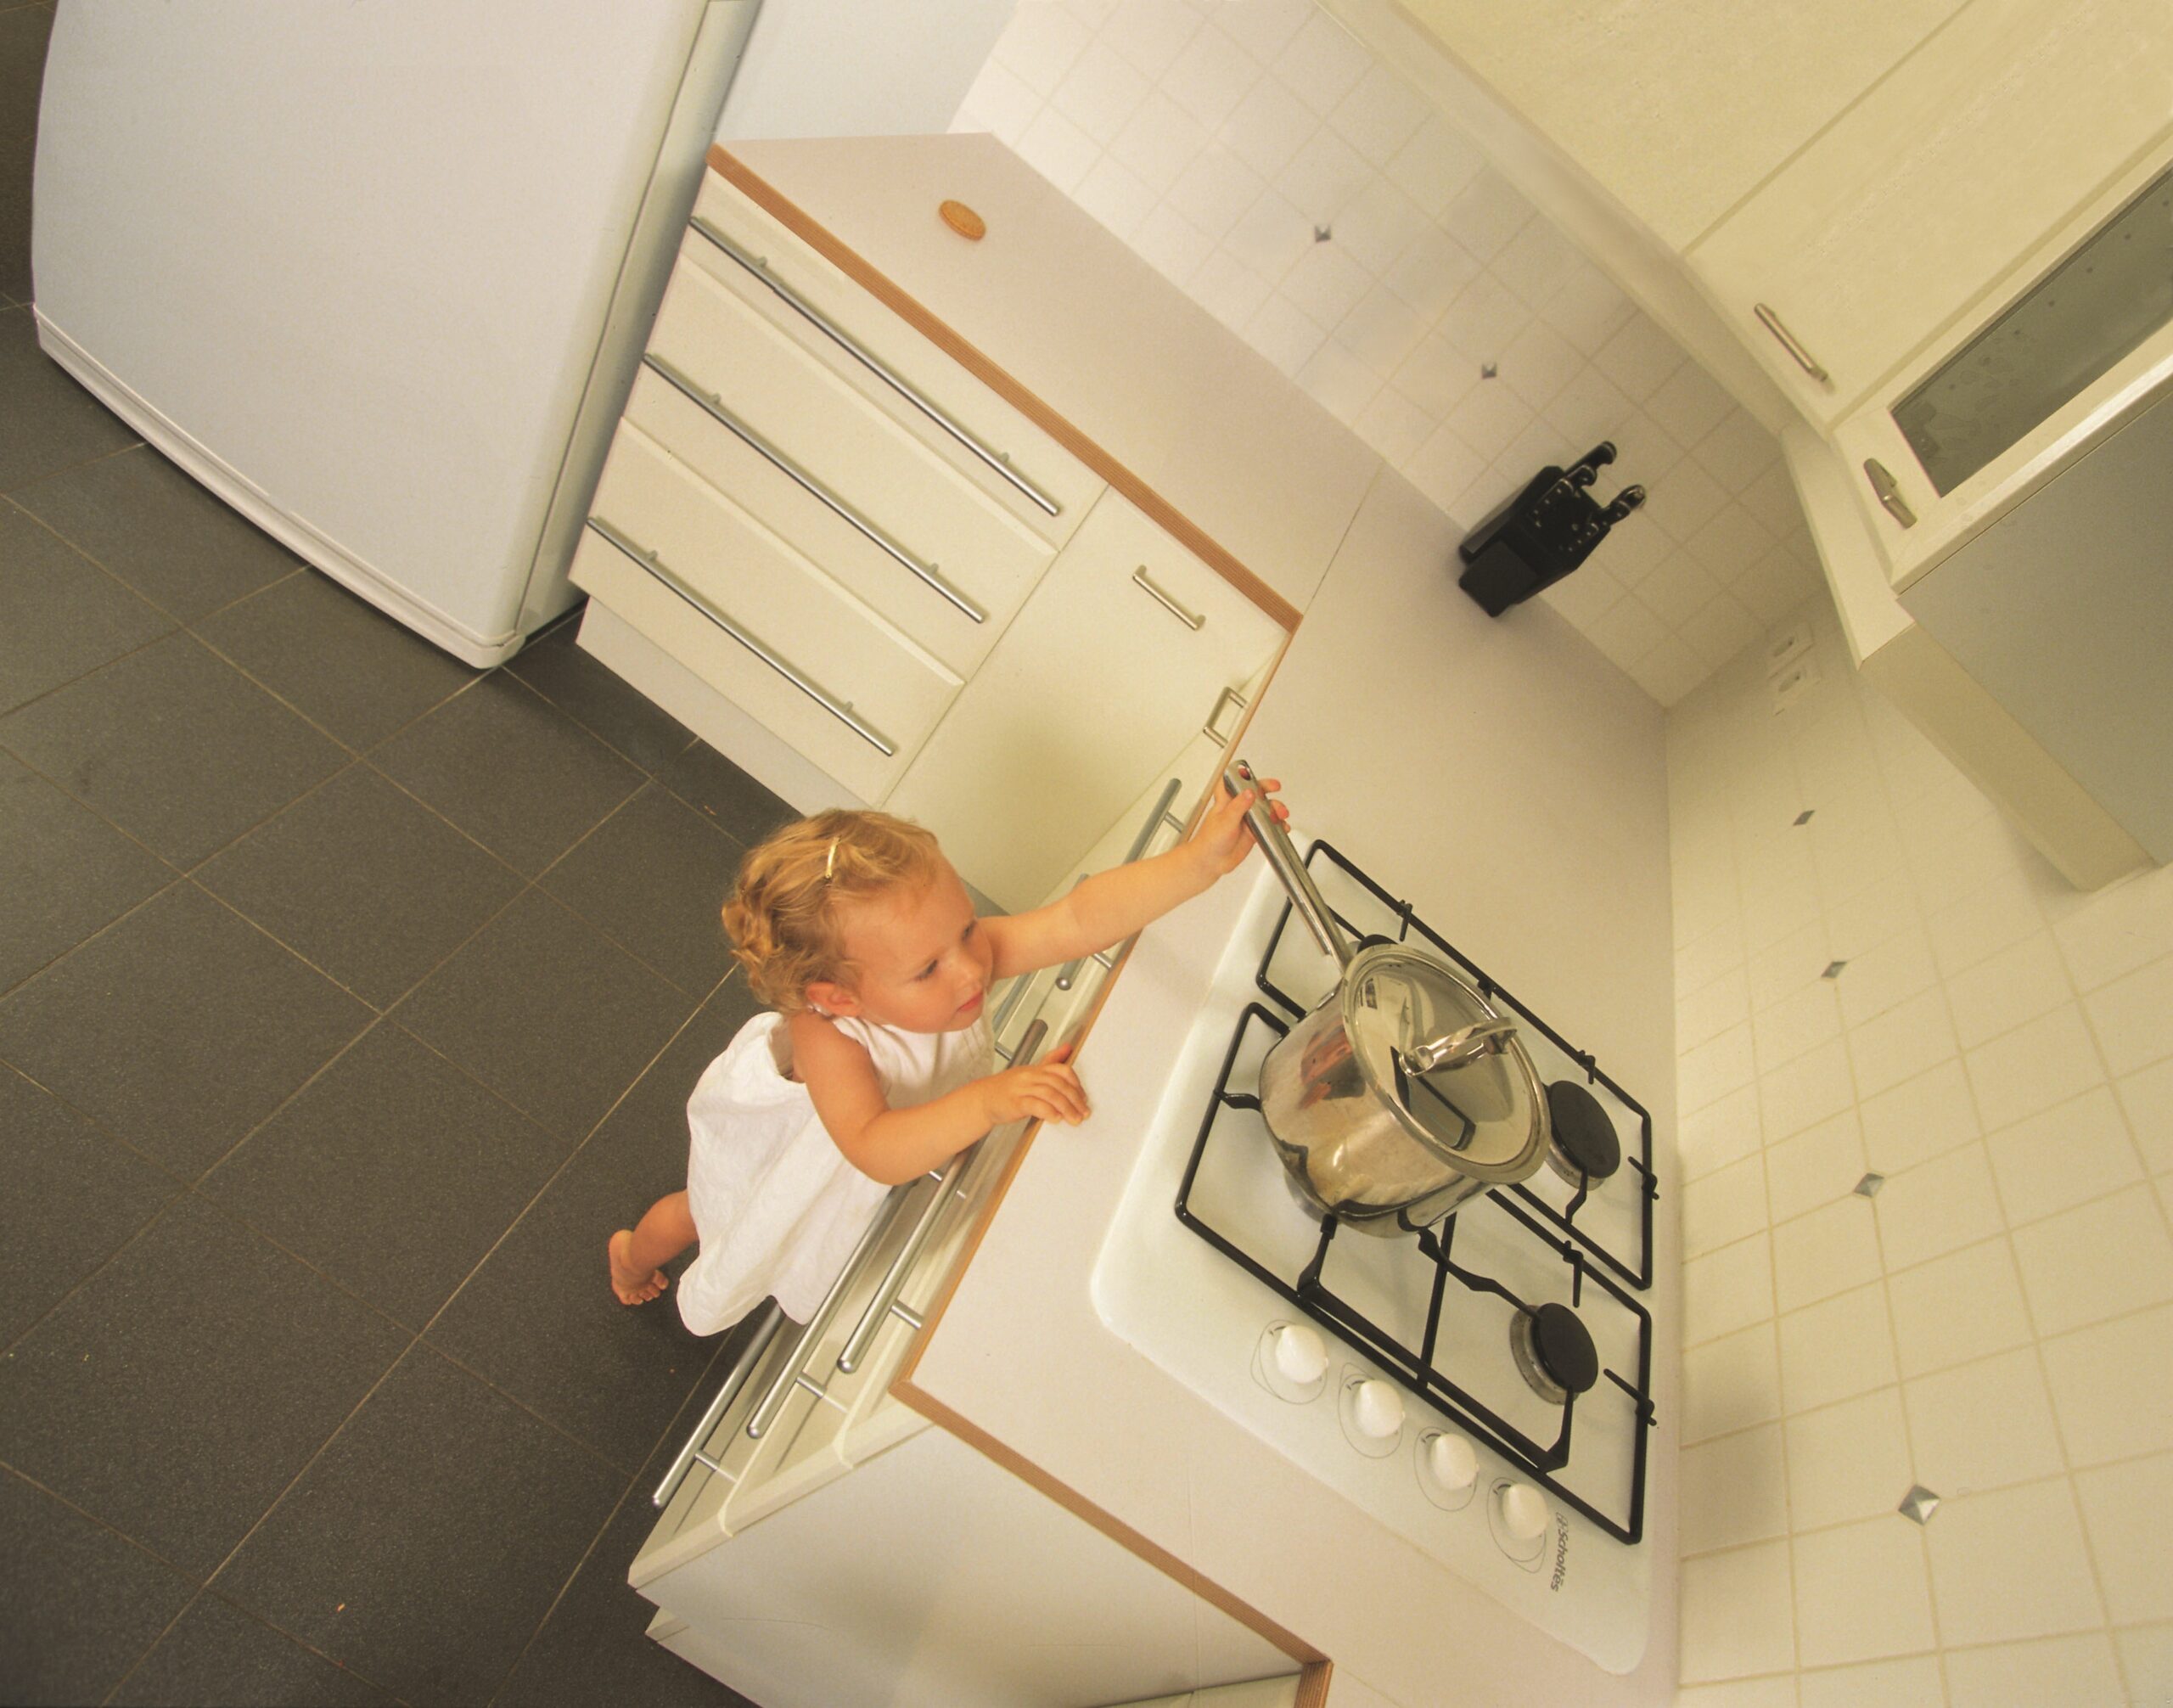 Avoid half-term horror by following cooking fire safety tips